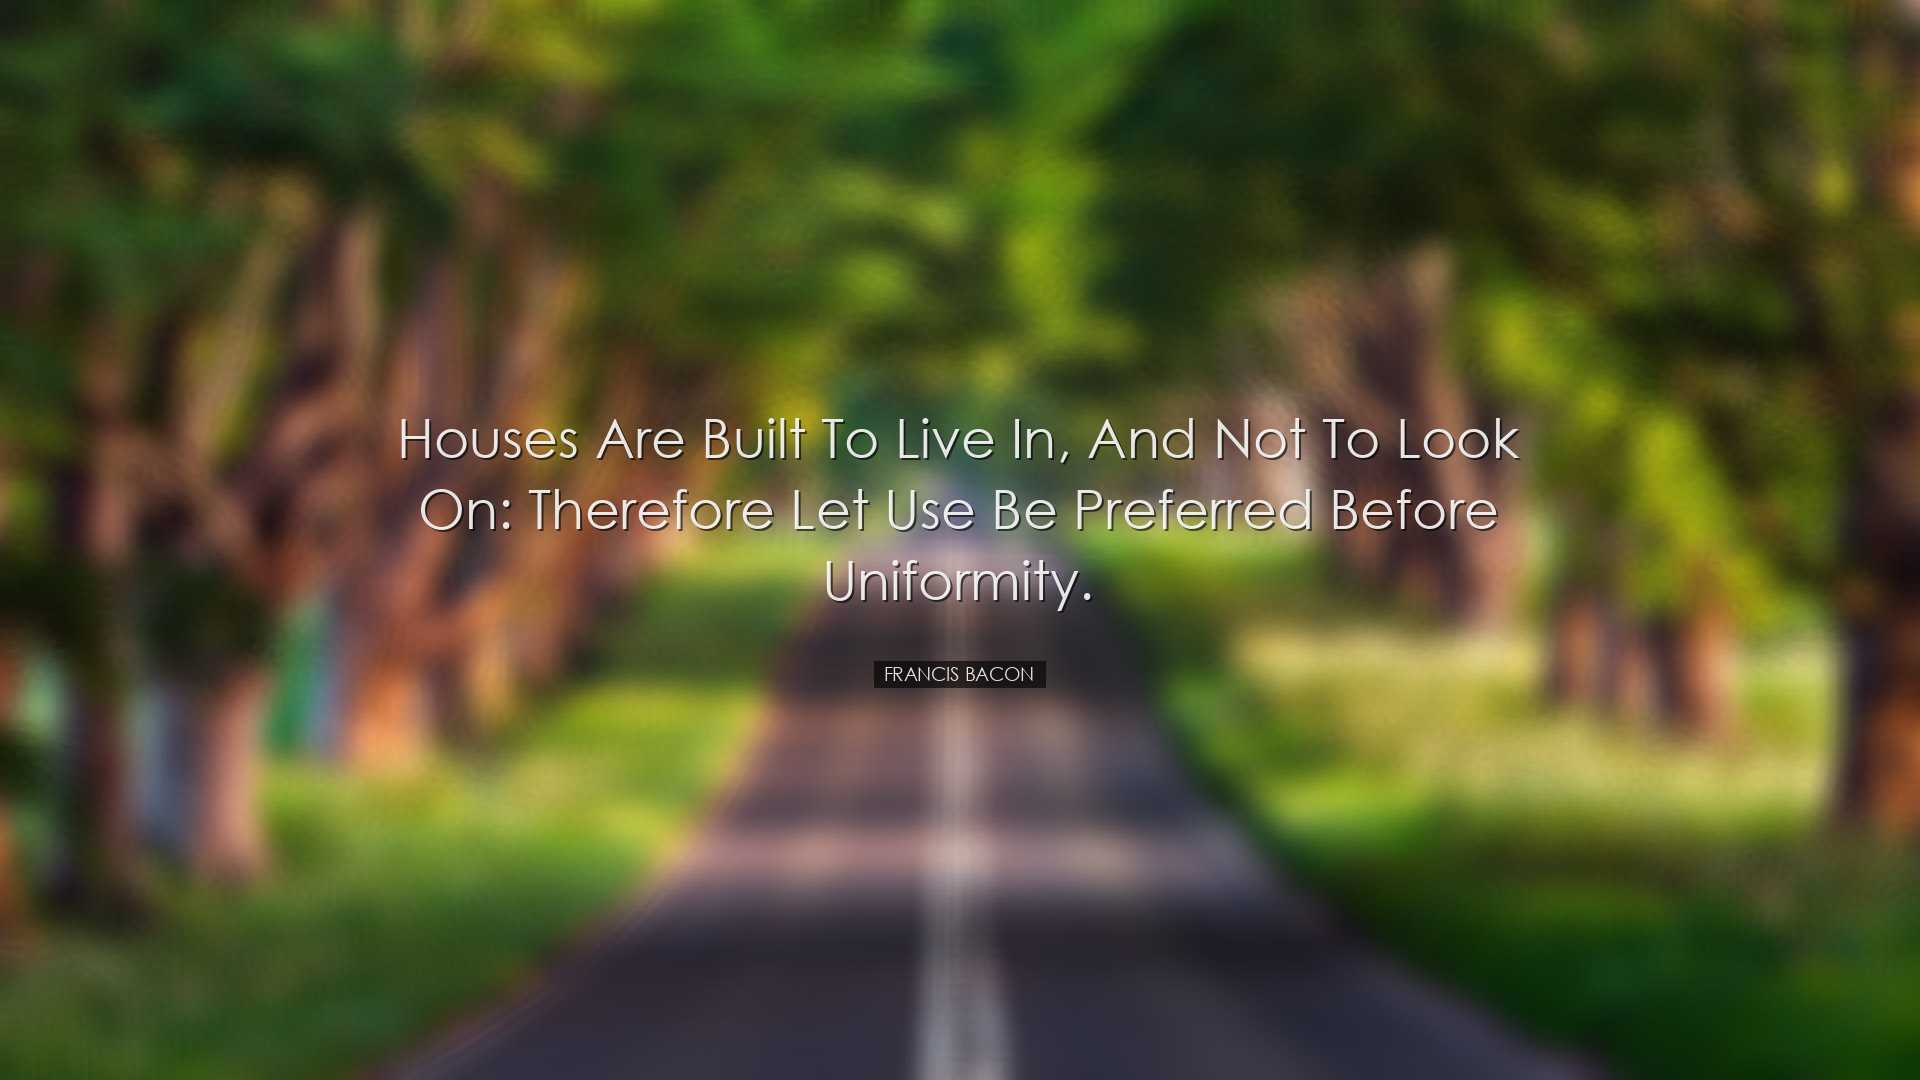 Houses are built to live in, and not to look on: therefore let use